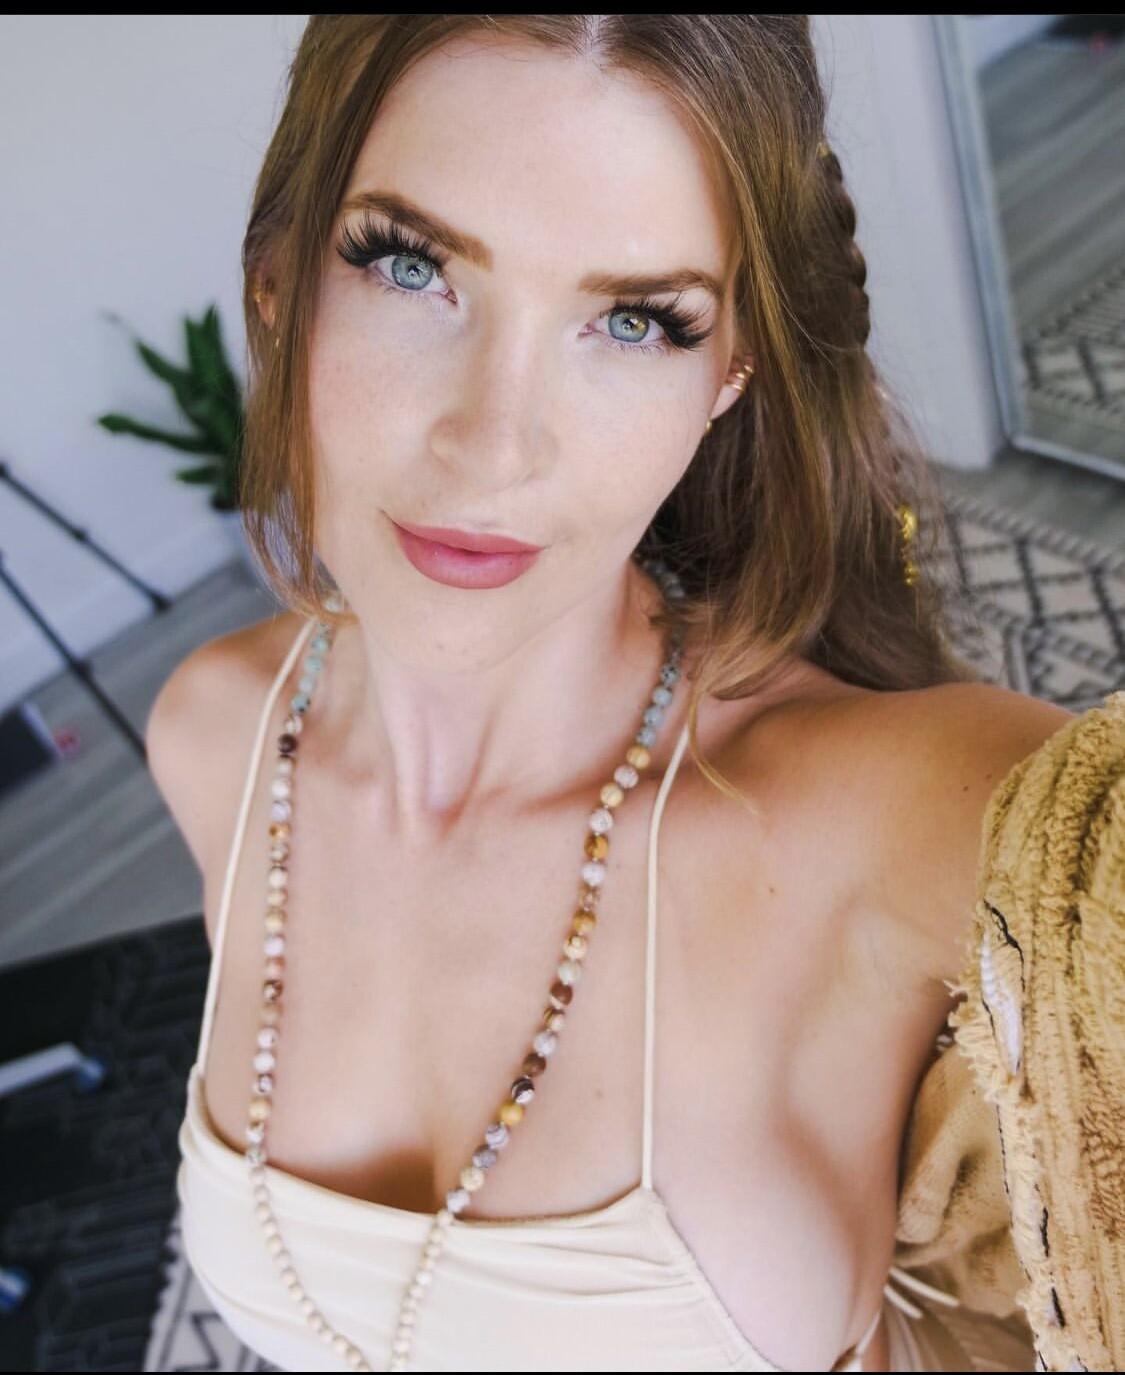 Kittyplays Sexy Fansly Set Leaked0005